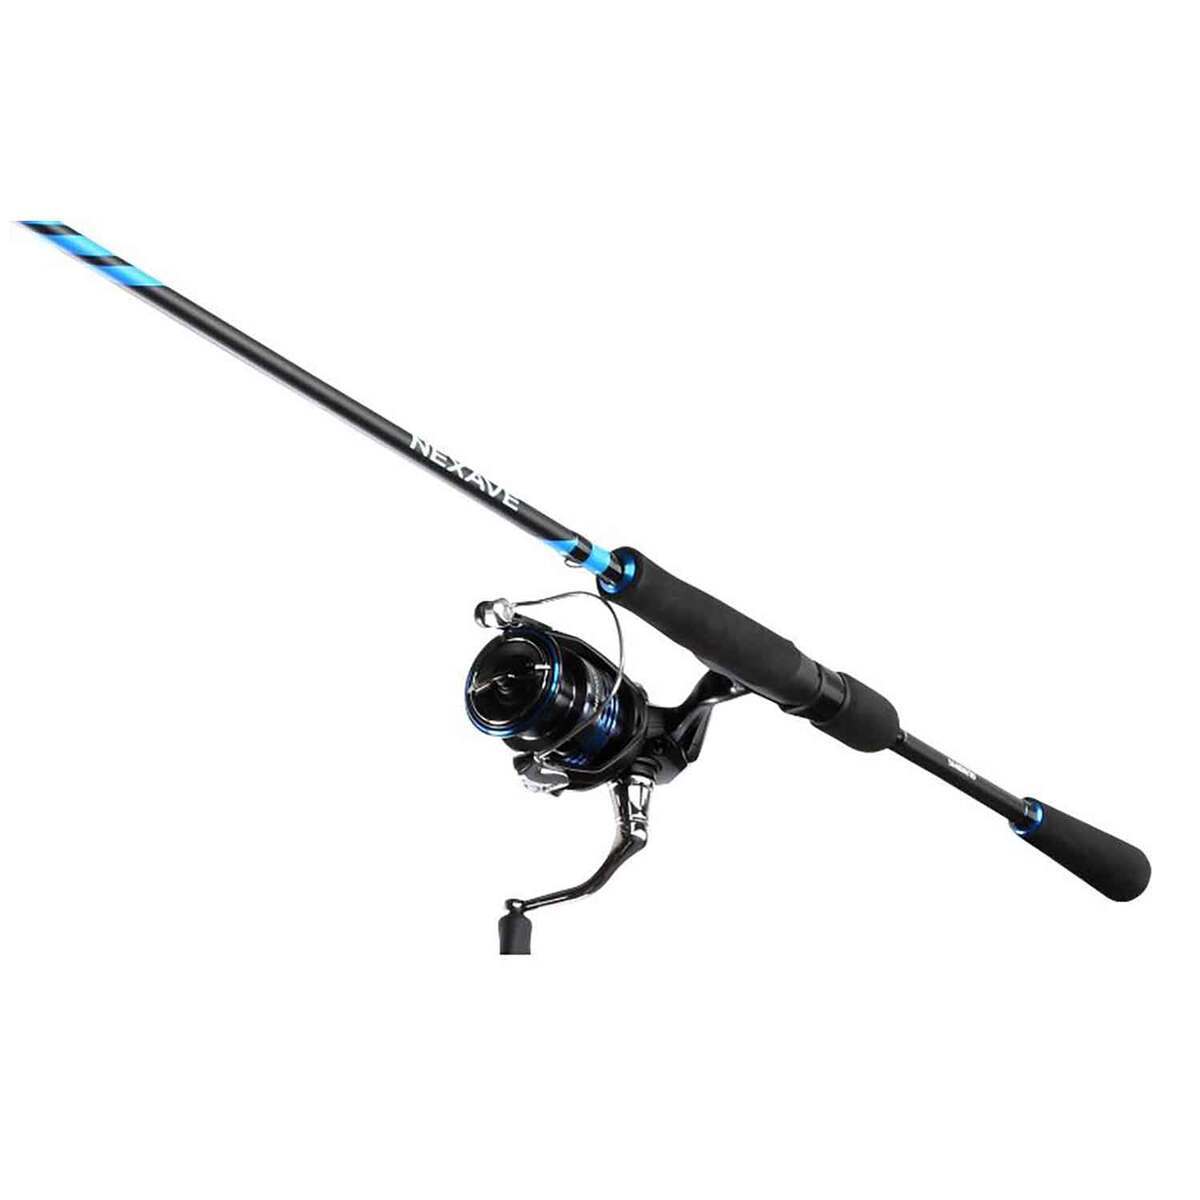 Bass Pro Shops Crappie Maxx Slab Grabber Rod And Reel Combo, 43% OFF